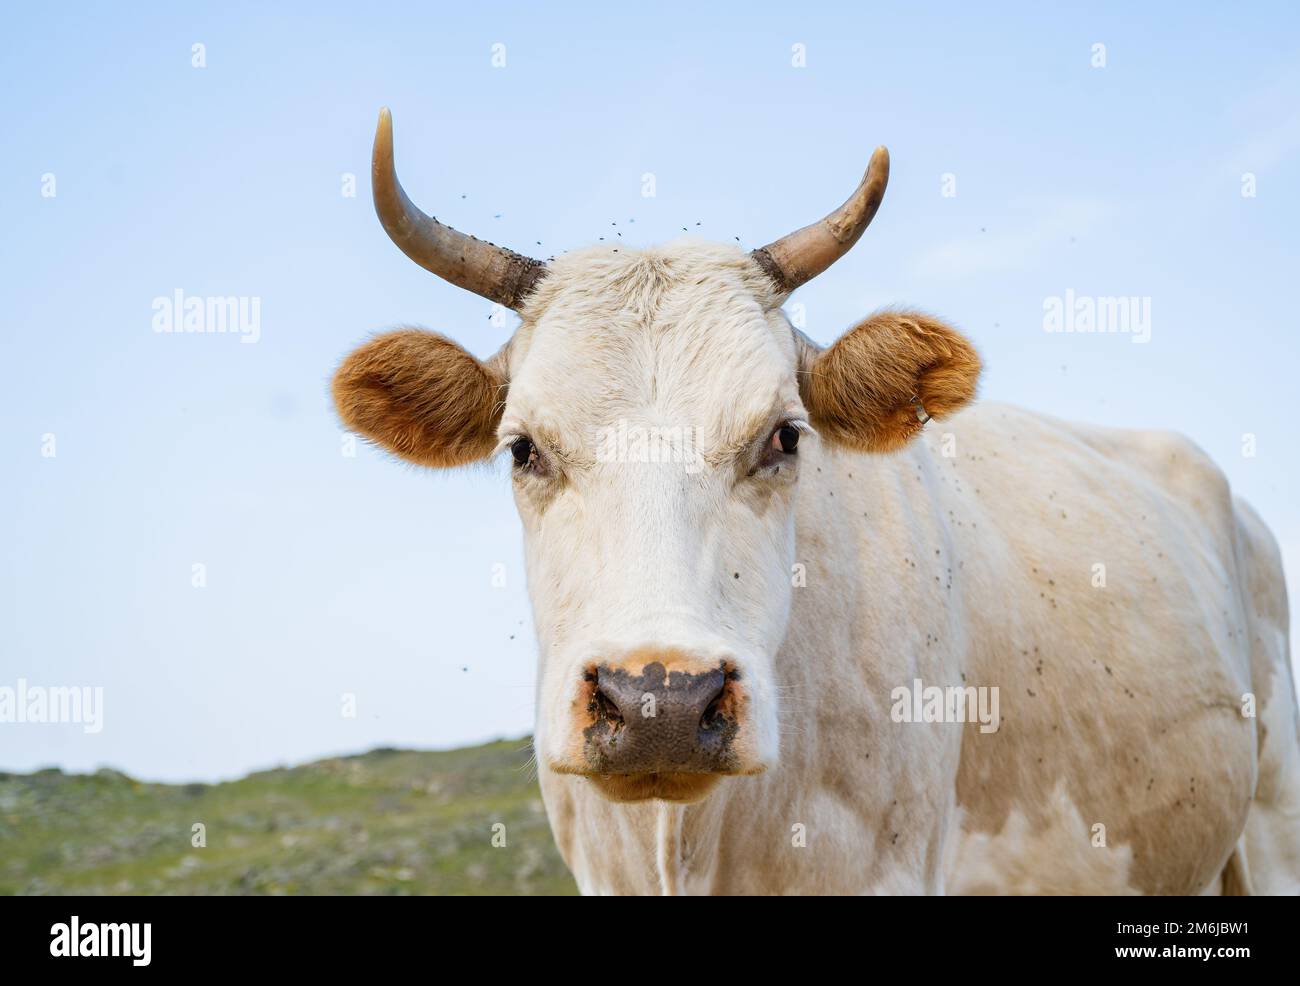 A fat white cow with horns poses standing in the grass against the background of a blue lake Baikal Stock Photo